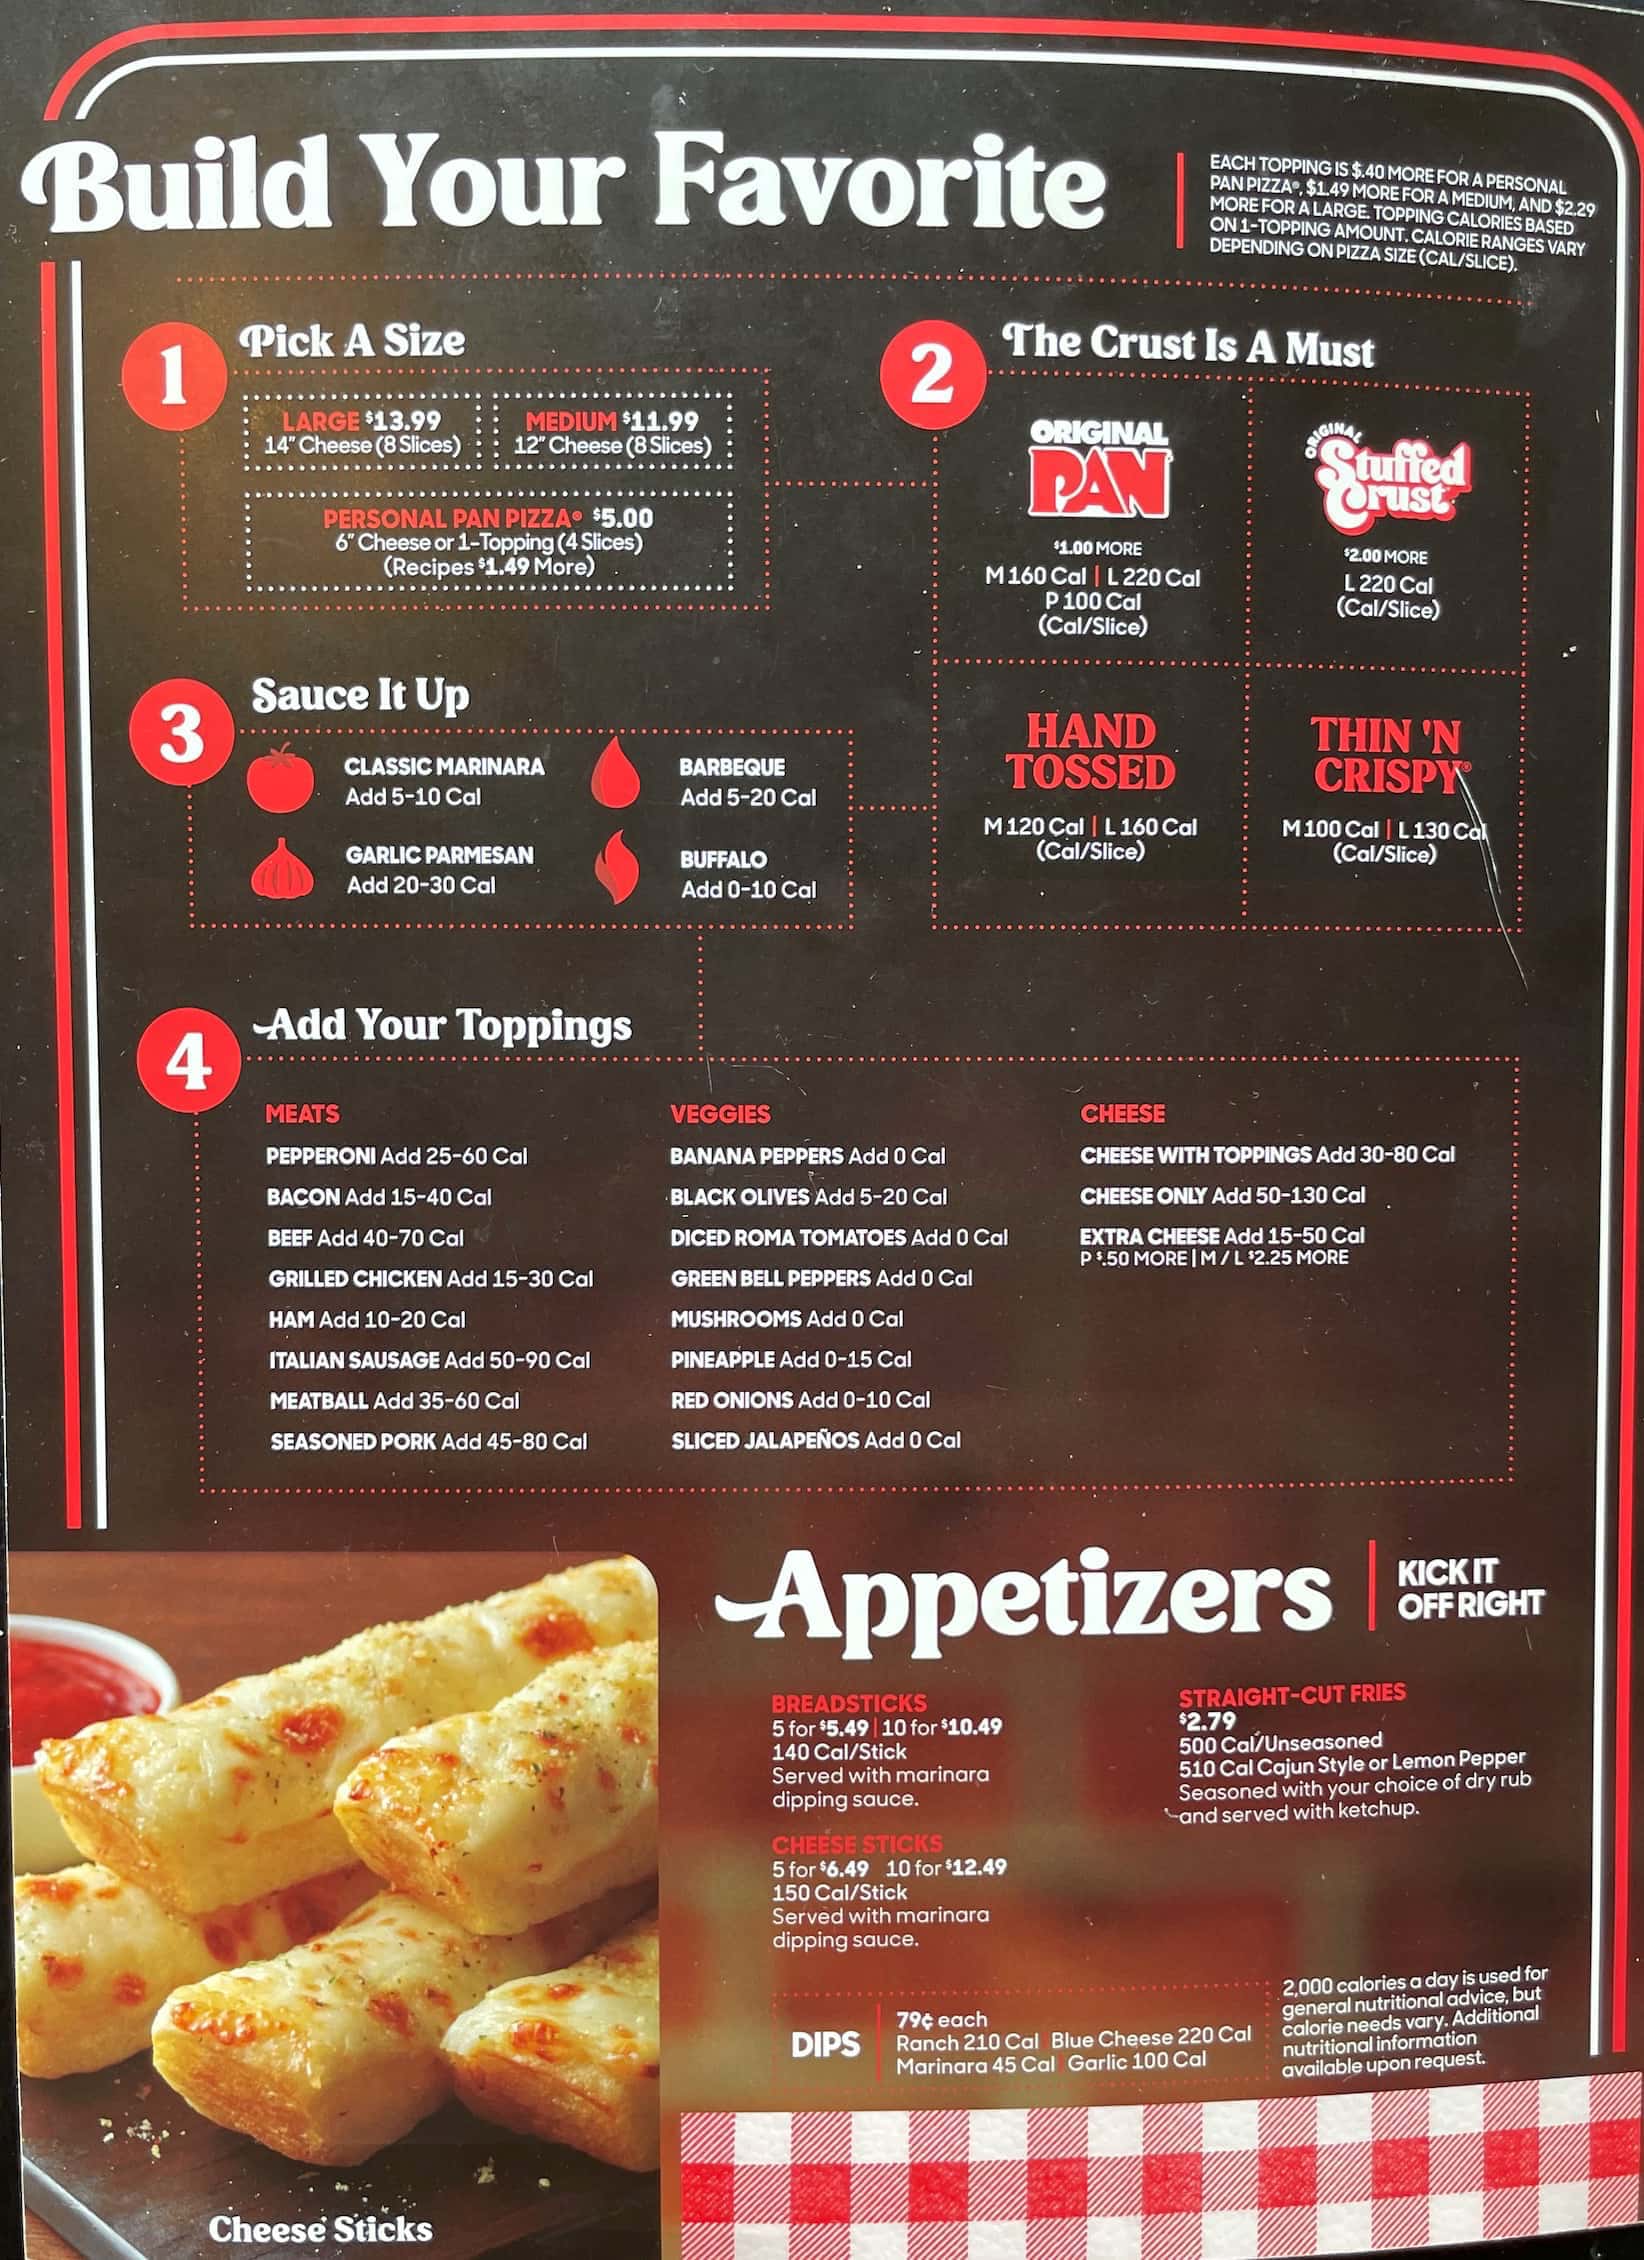 Pizza Hut Appetizers and Build Your Favorite Menu